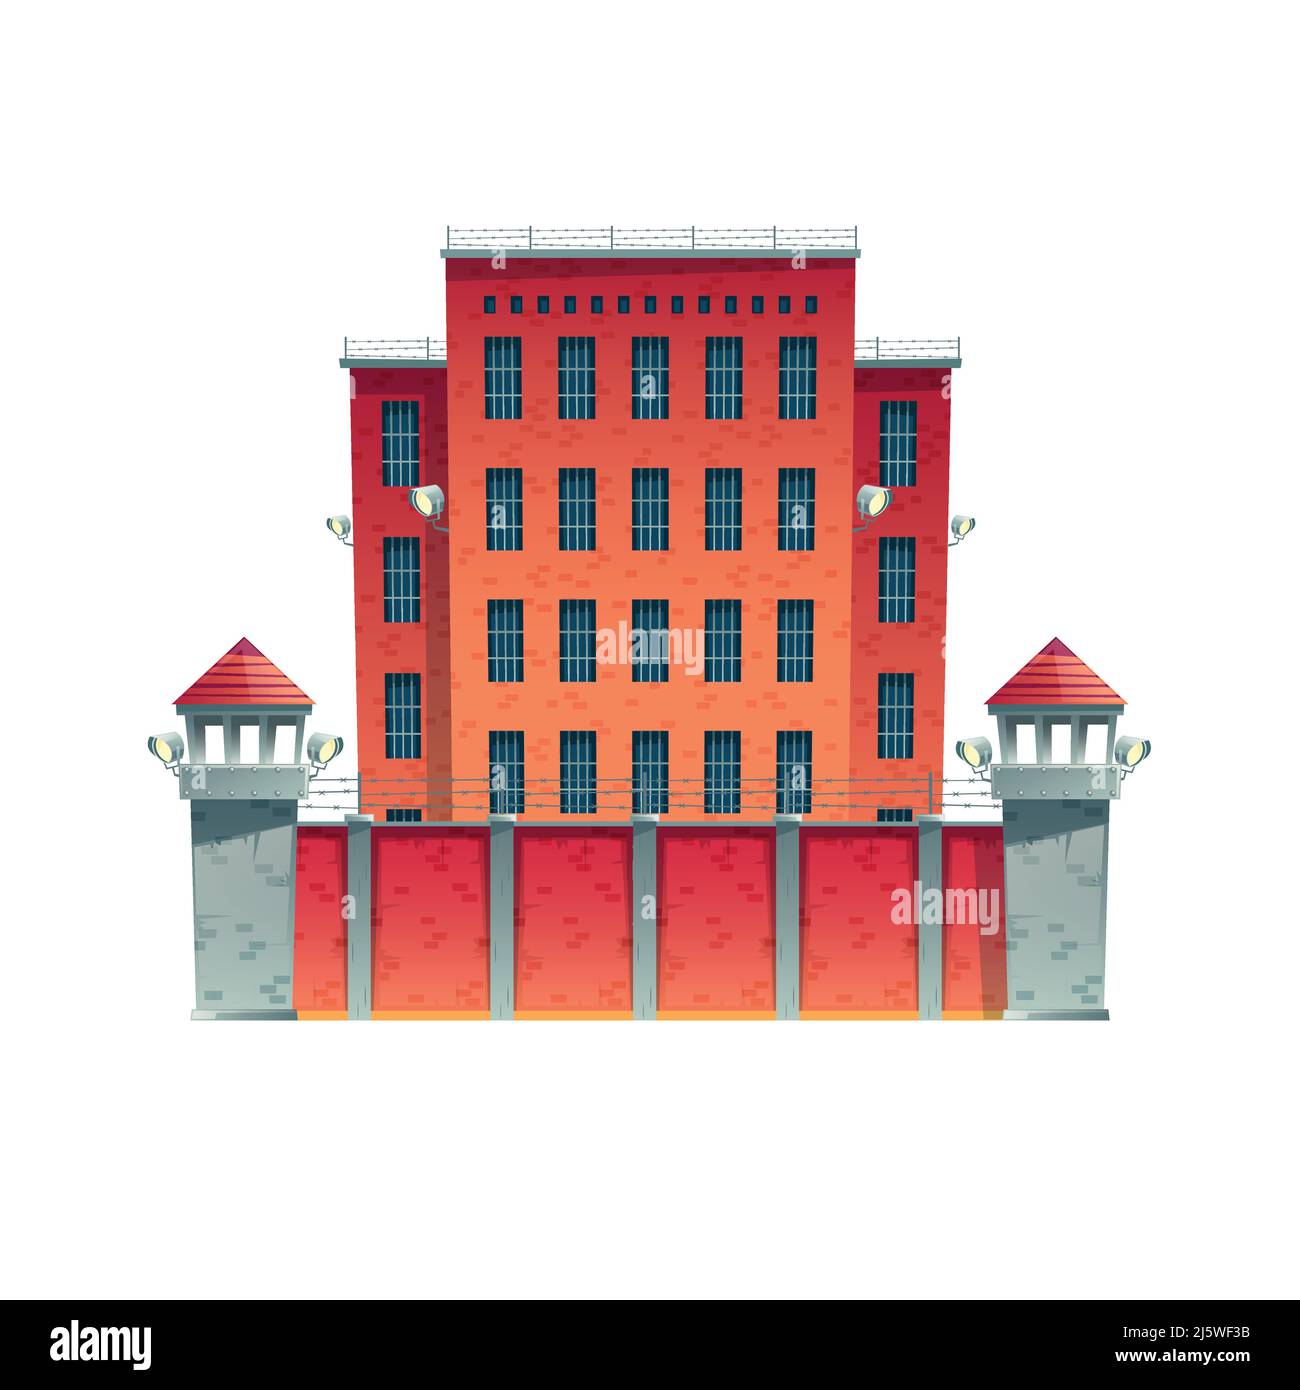 Modern prison, jail building with walls of red brick, bars on windows, guard observation towers on high fence with barbed wire and searchlights cartoo Stock Vector